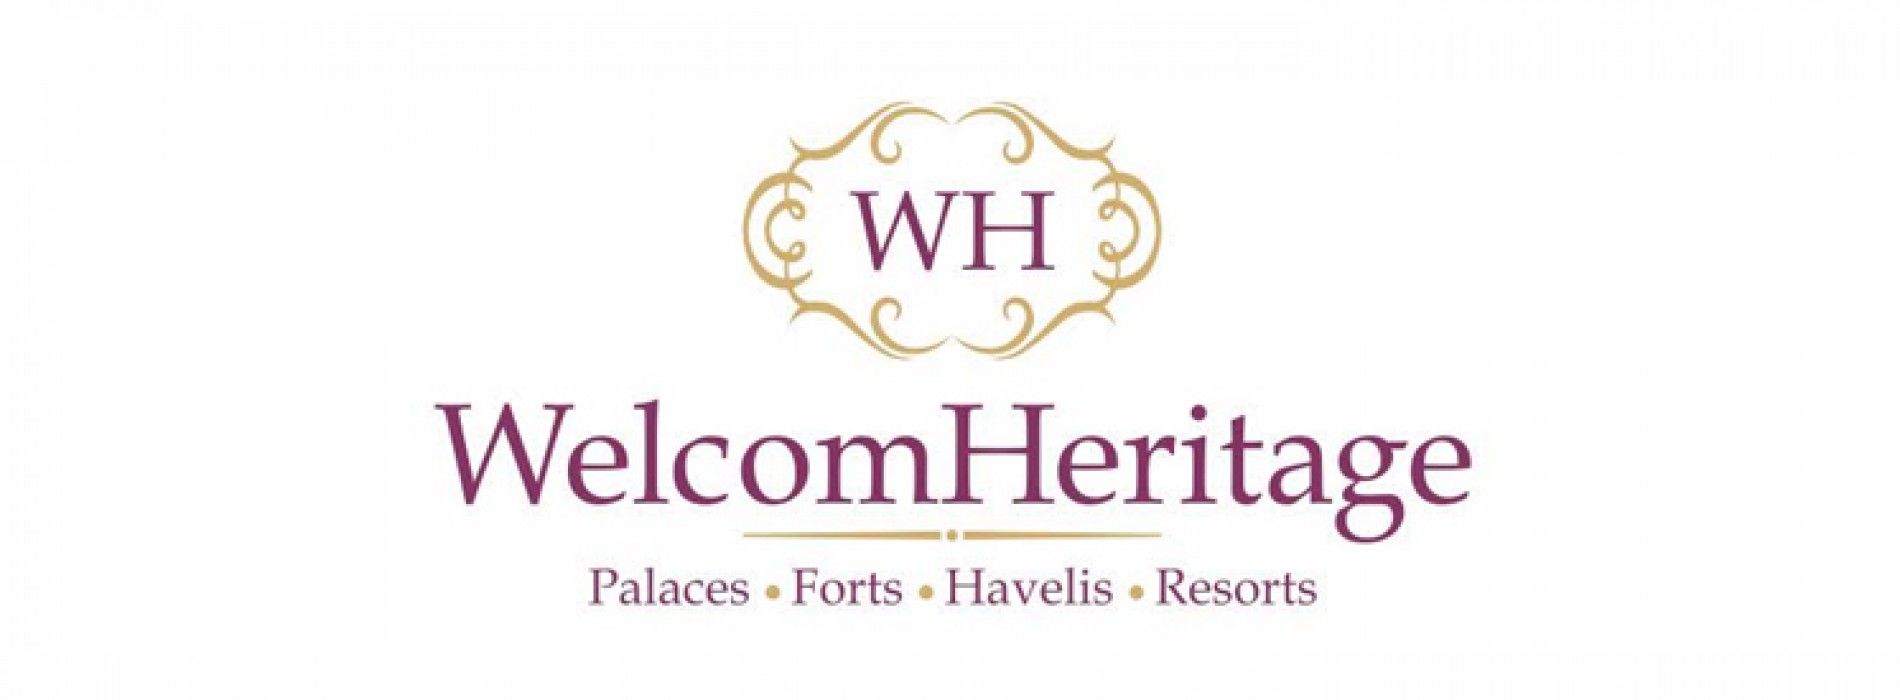 WelcomHeritage Hotels has a new CEO